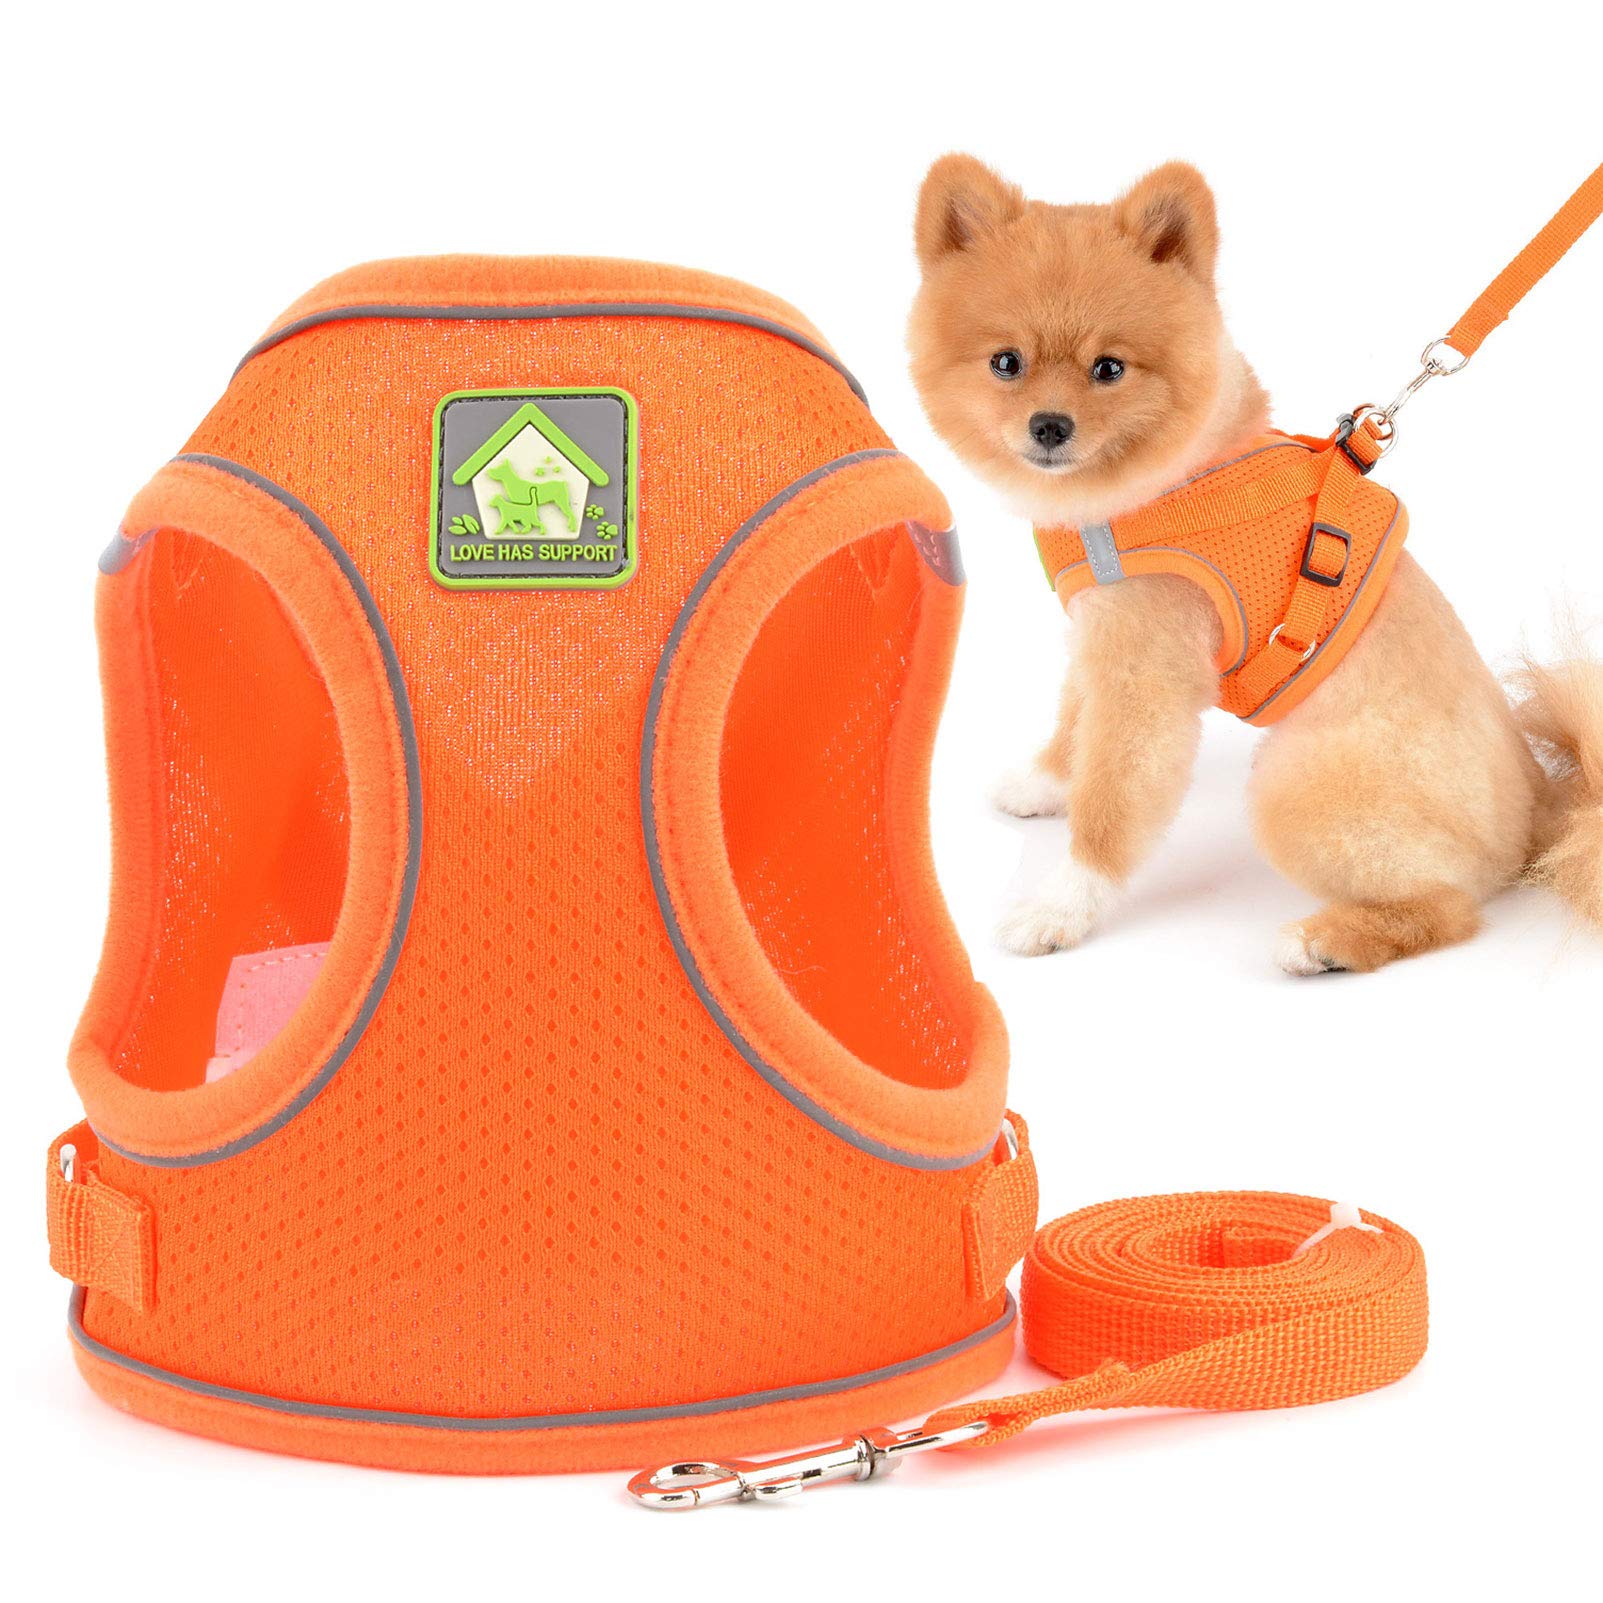 Mesh Step-in Small Dog/Cat Harness and Leash Set